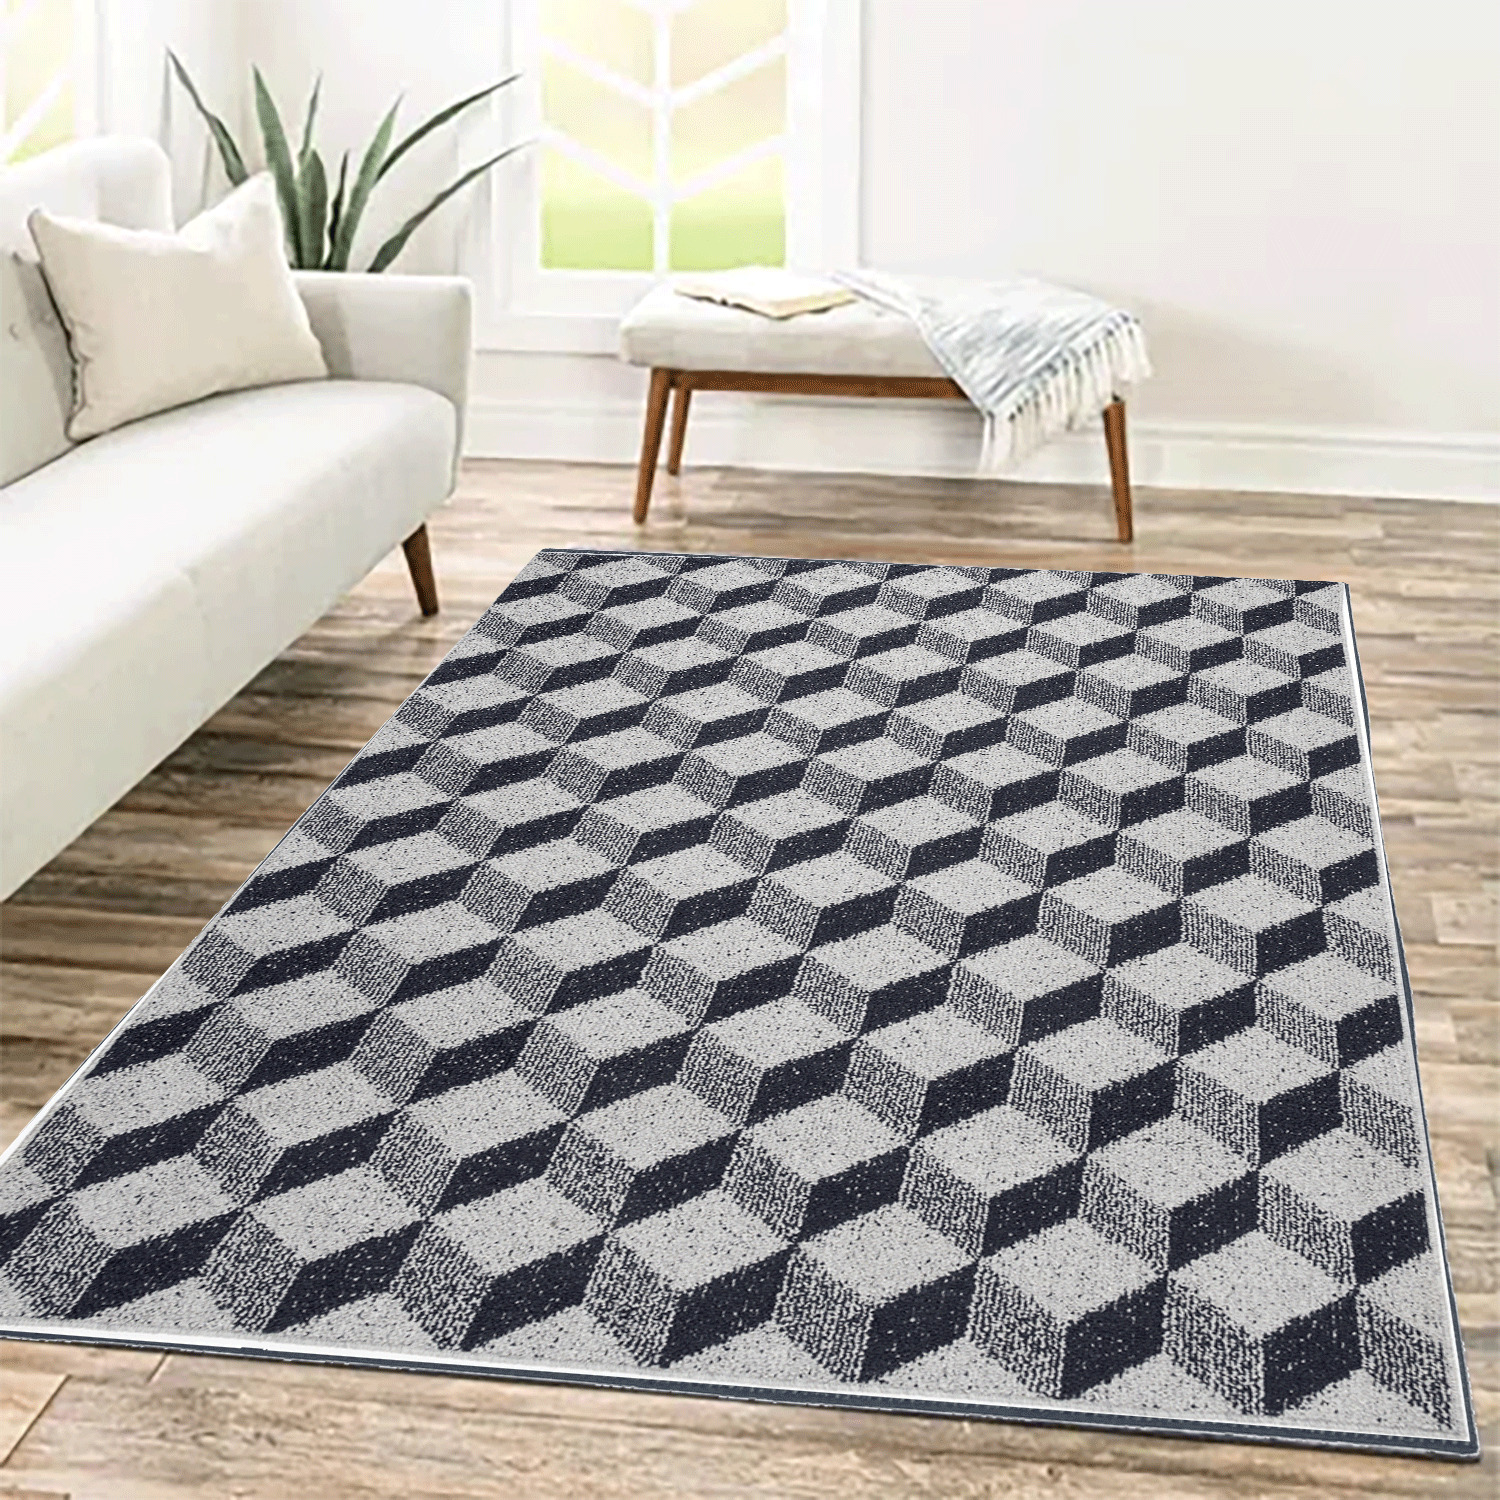 FUN PACK Collection - Indoor decorative rug, 48x60